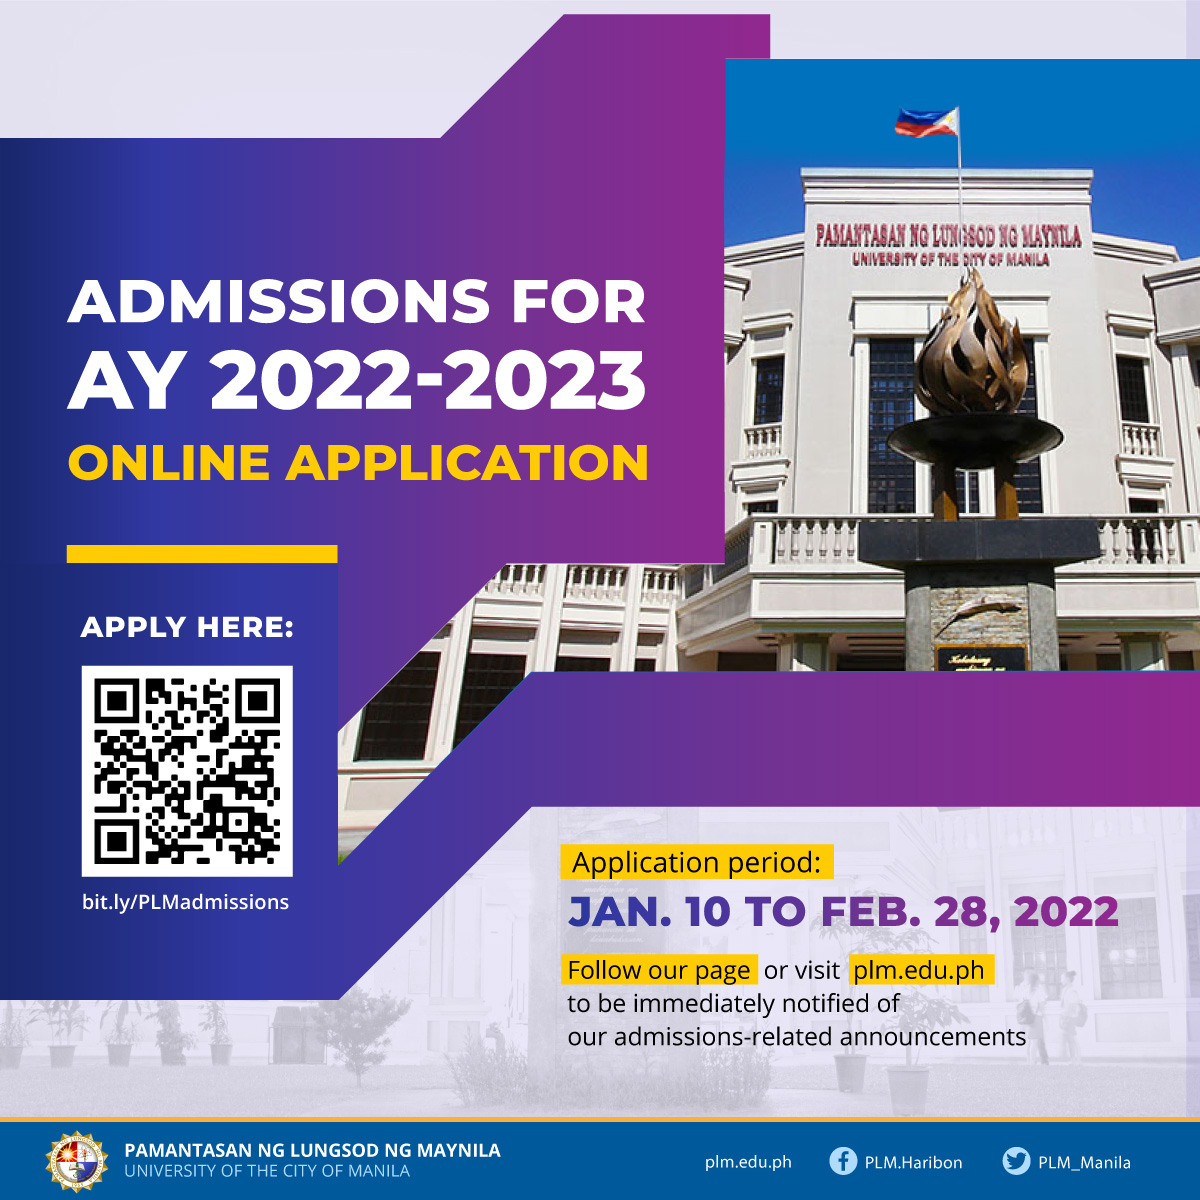 The Pamantasan ng Lungsod ng Maynila (PLM) will accept online applications for undergraduate admissions for Academic Year 2022-2023 from January 10 to February 28, 2022.